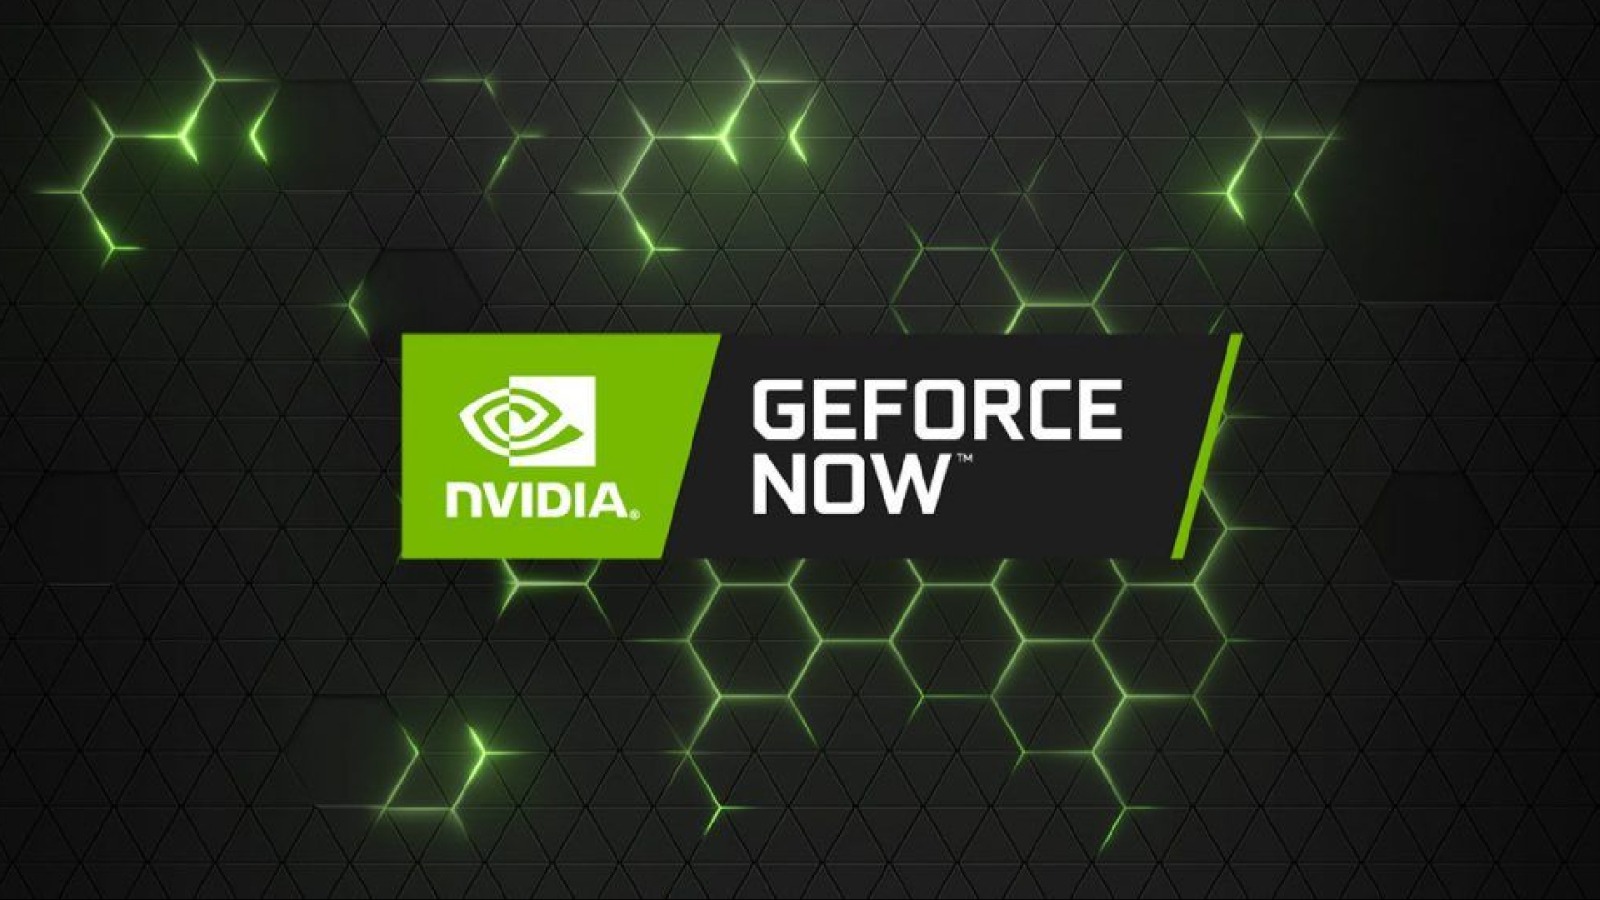 GeForce NOW Marks 4 Years Revolutionizing PC Game Streaming